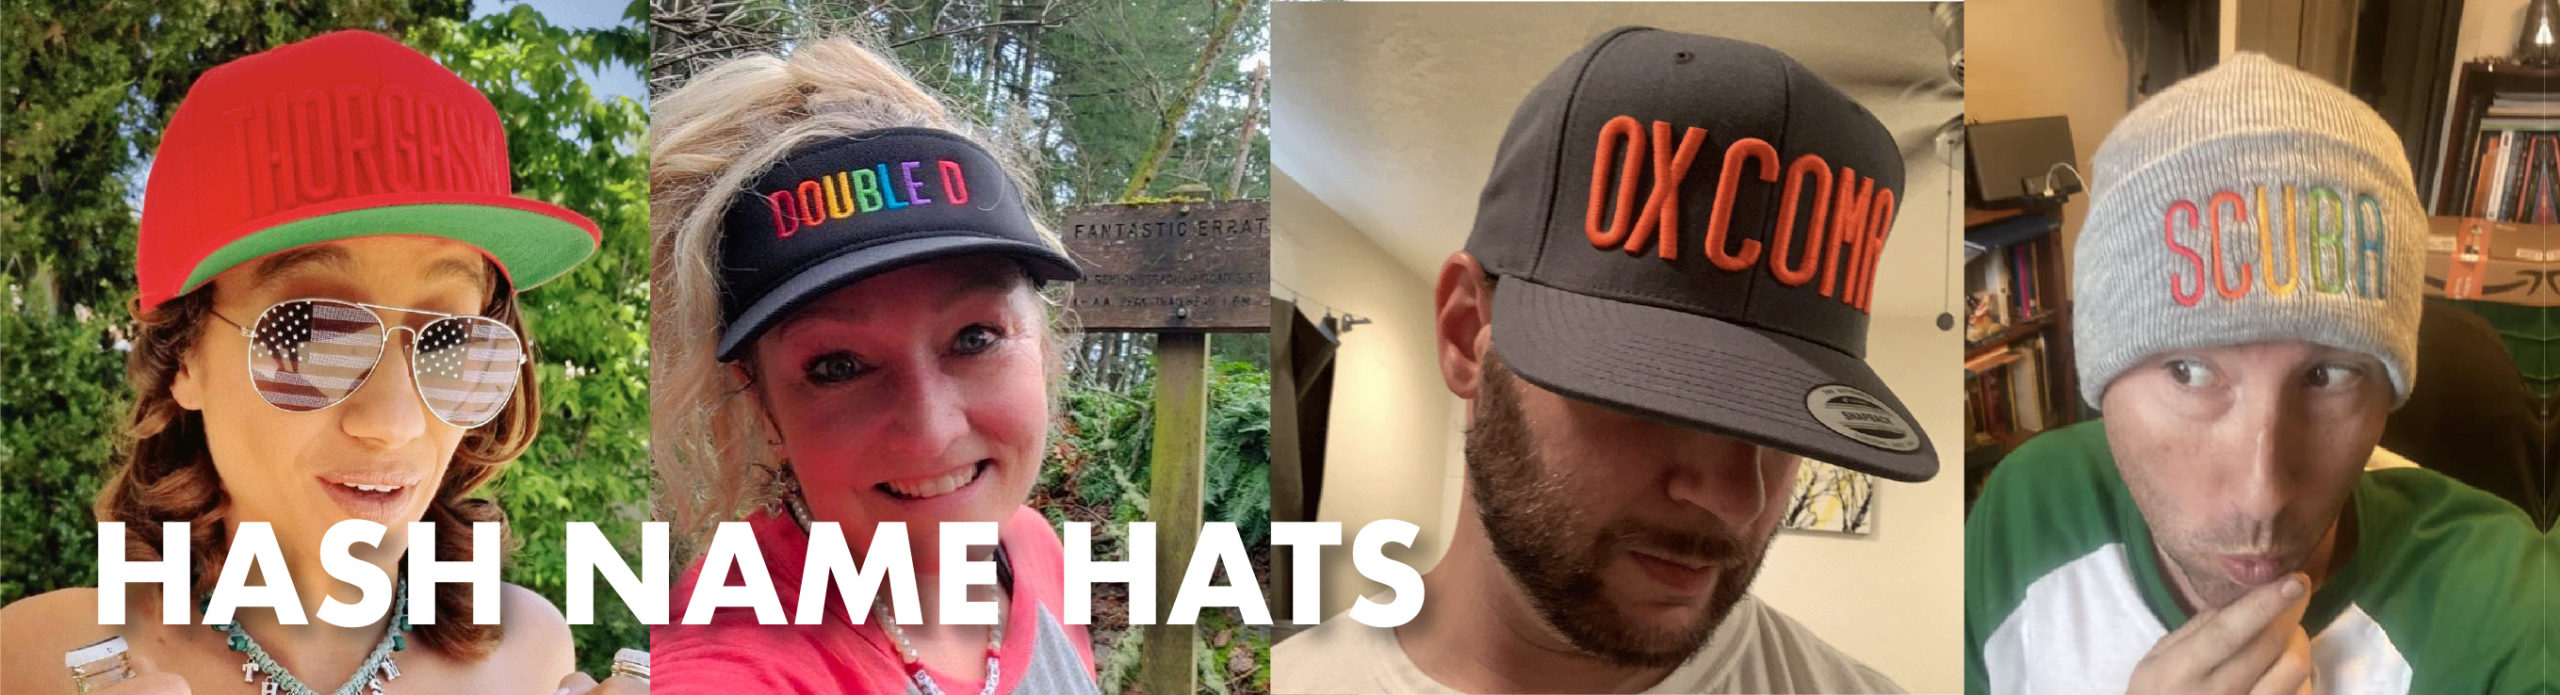 Personalized Hash Name Hats